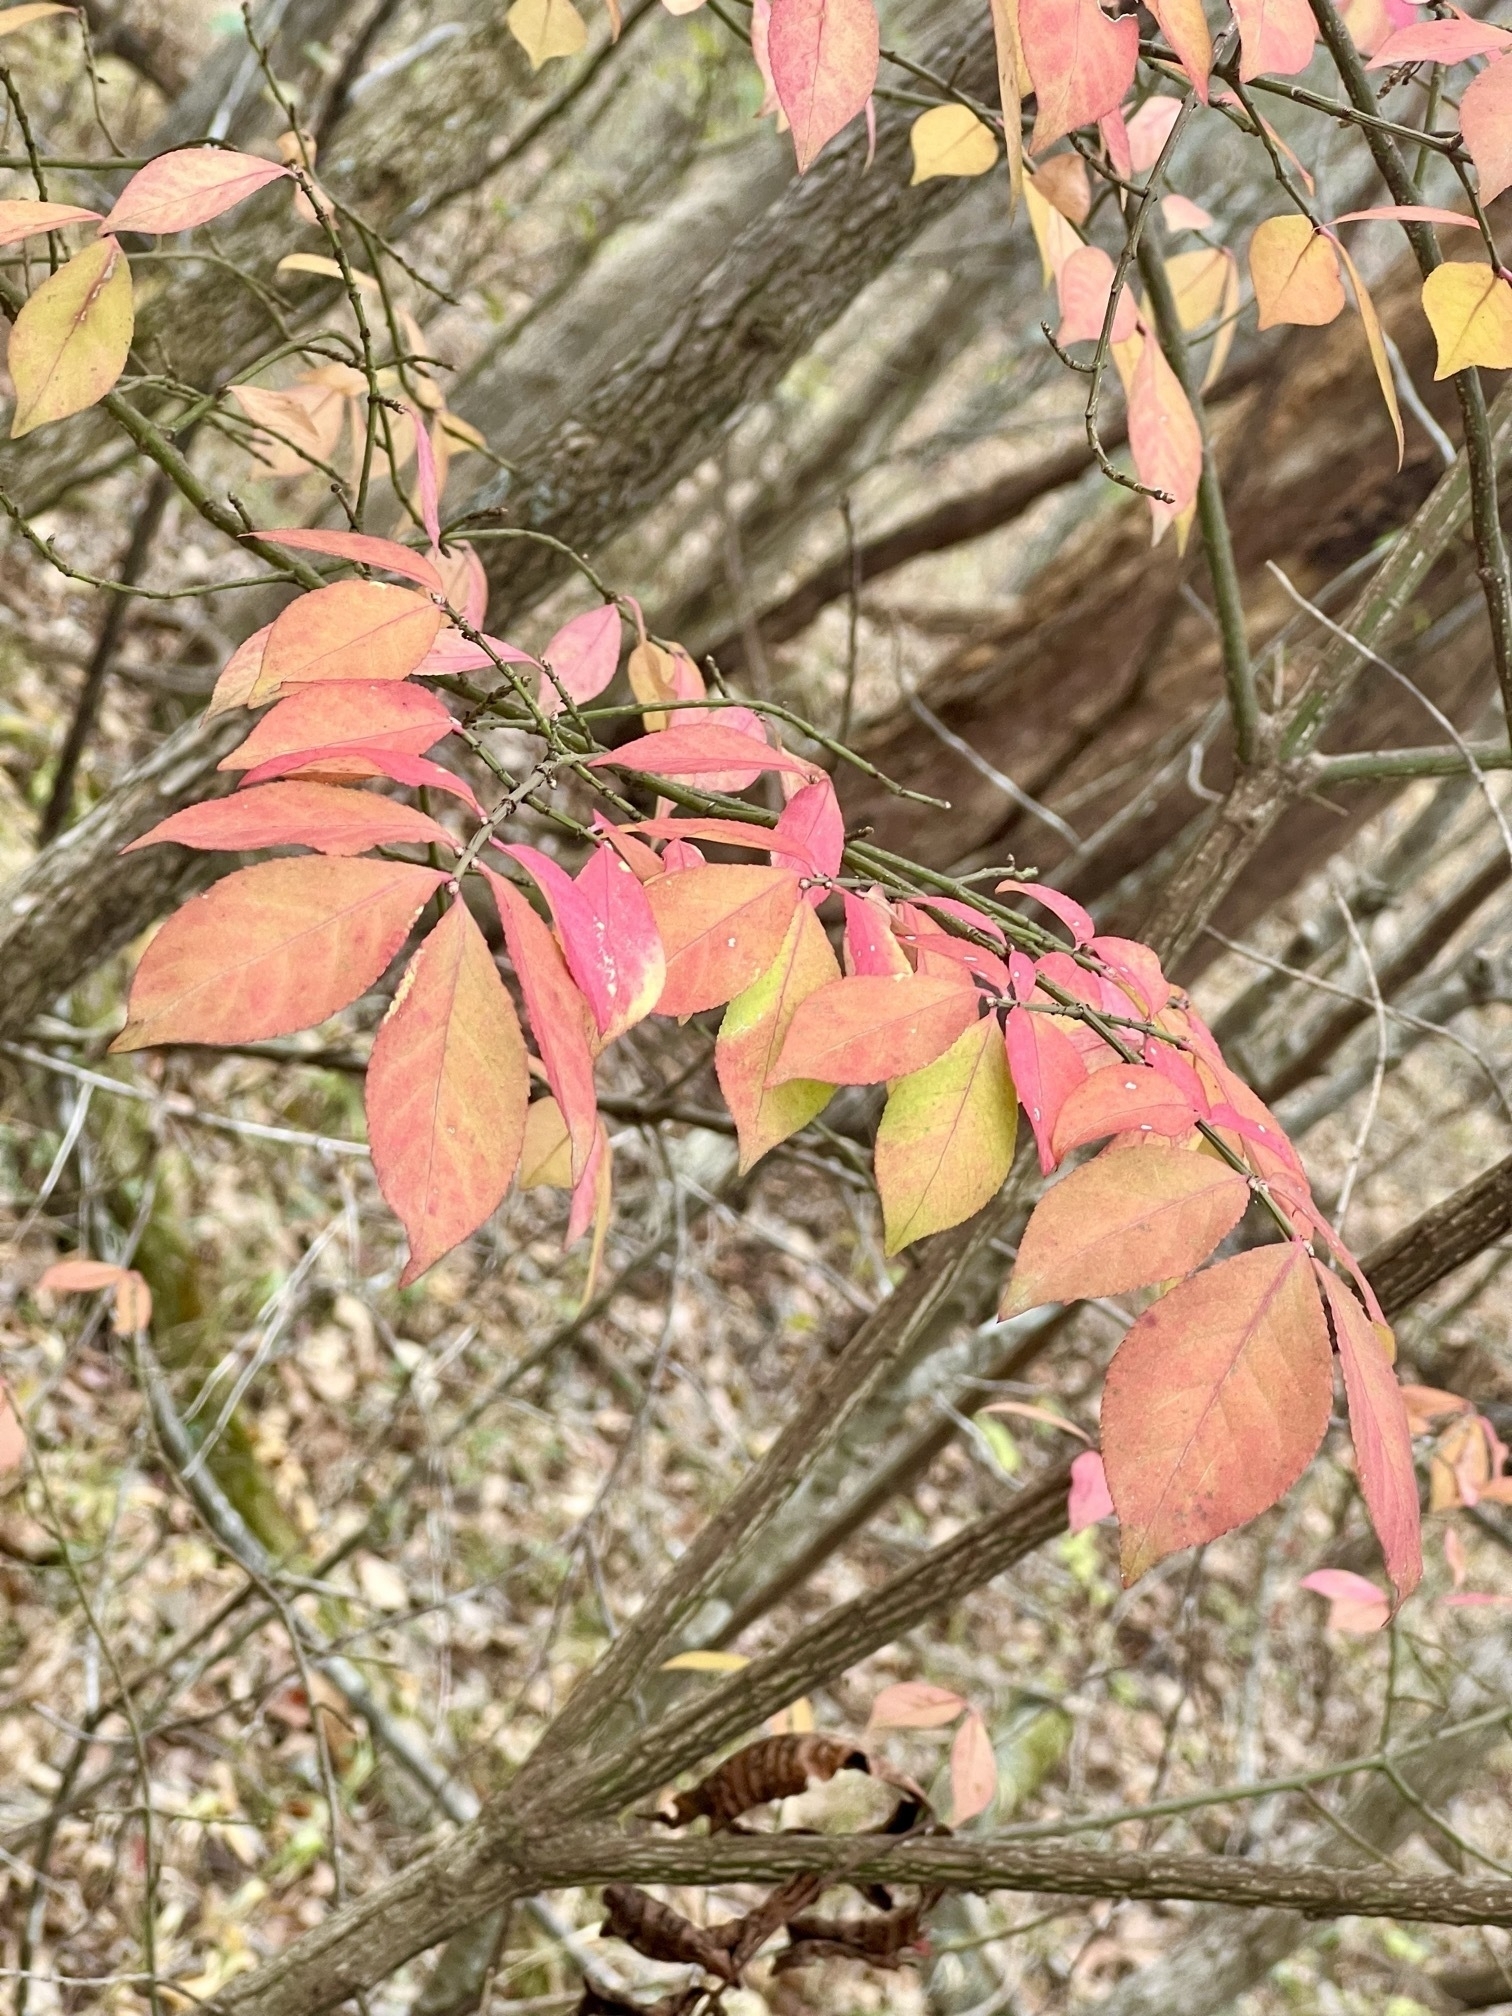 The fall colors of a burning bush in the forest. A branch of leaves of pink, yellow and green, set against a slightly blurred background of small tree branches in a winter woodland.